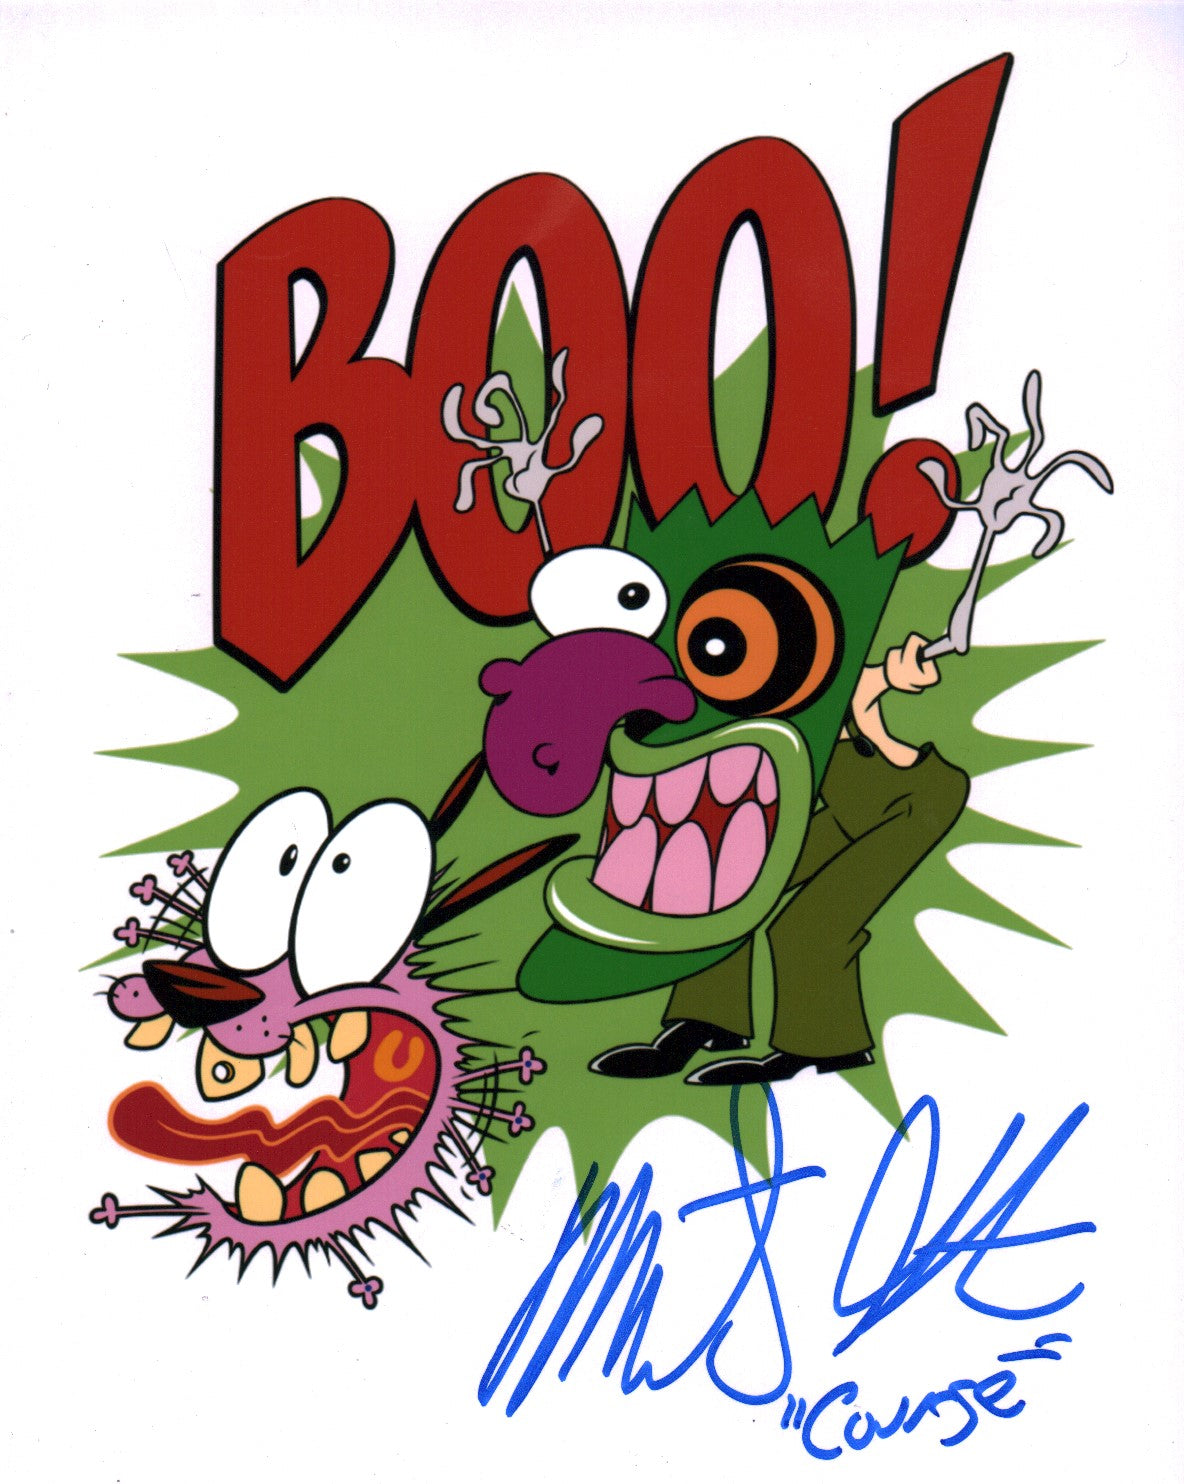 Marty Grabstein Courage the Cowardly Dog 8x10 Signed Photo JSA COA Certified Autograph